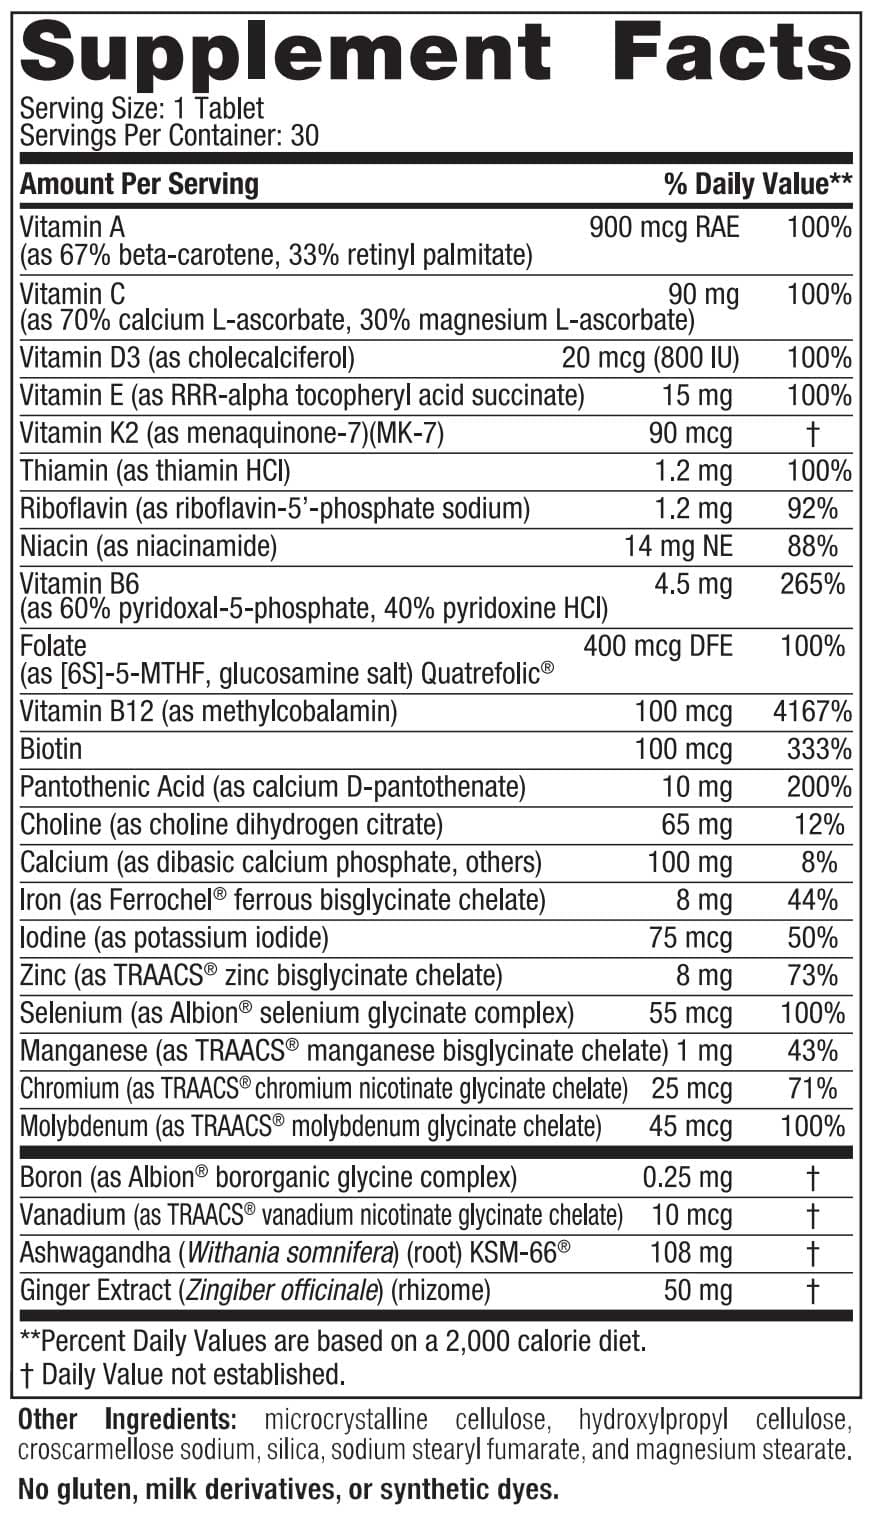 Nordic Naturals Women's One Daily Multivitamin Ingredients 